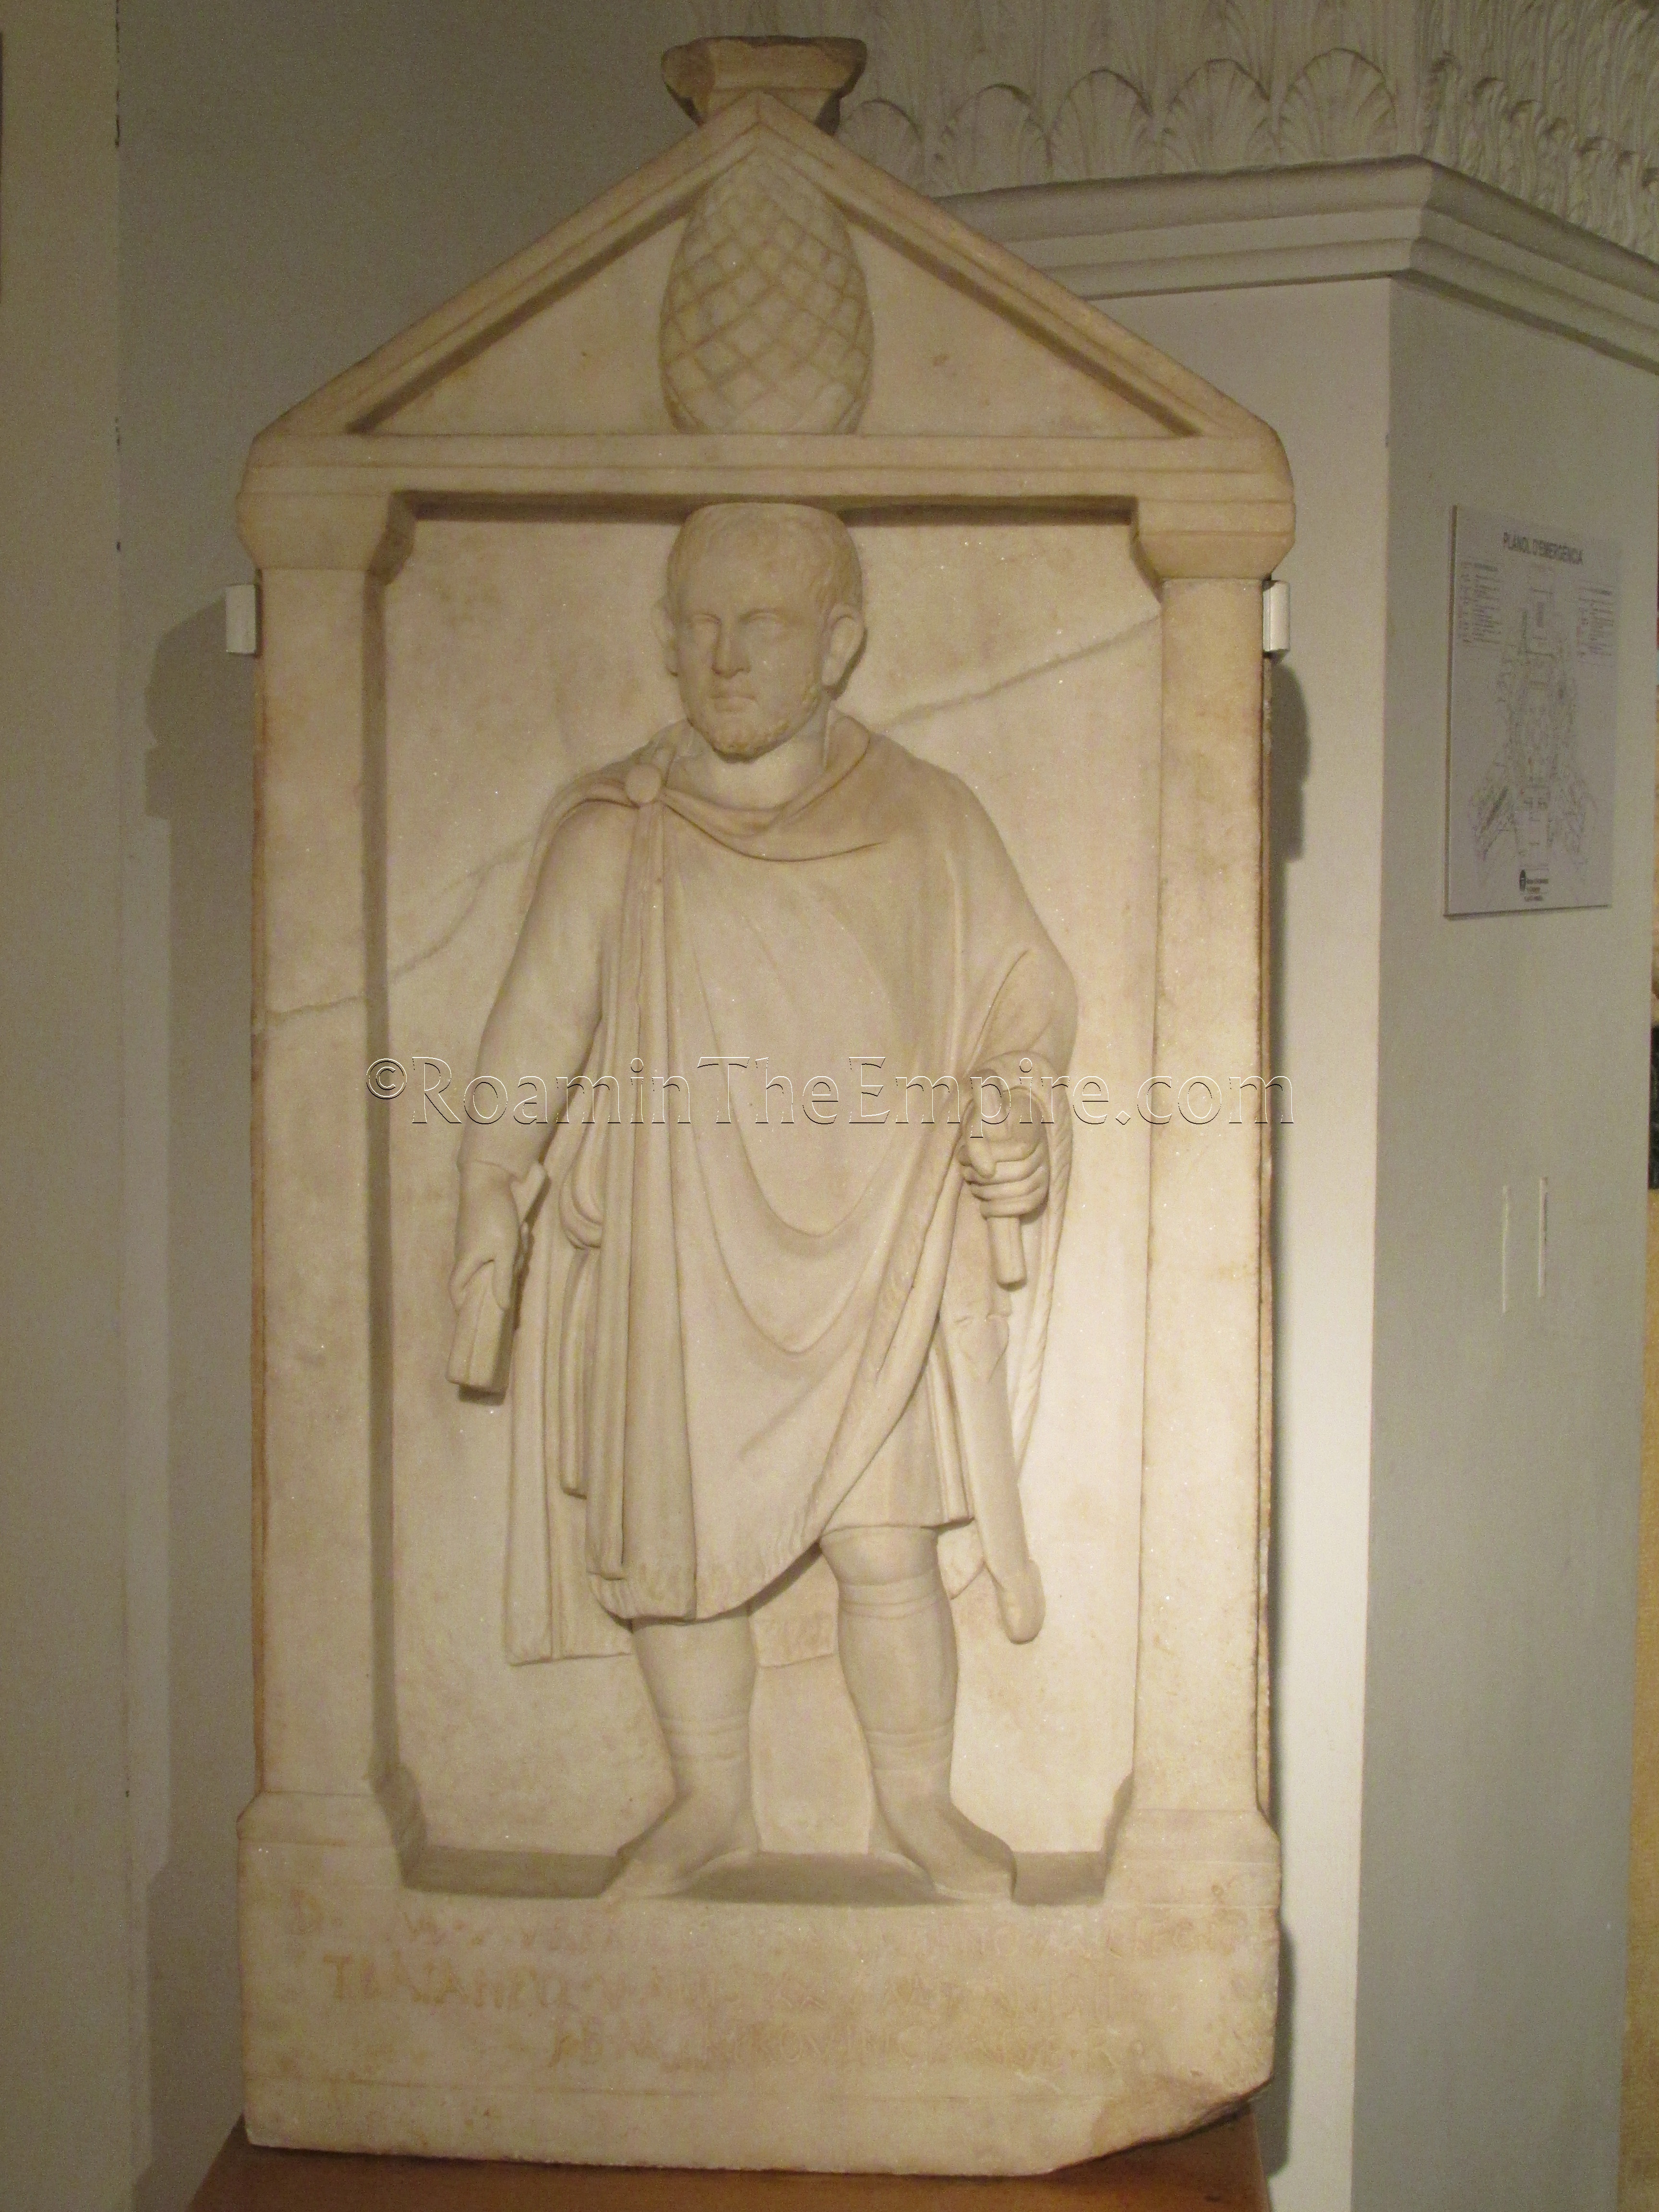 Funerary stele of Aurelius Firmus, a soldier in Legio II Traiana Fortis, who was stationed in Egypt.